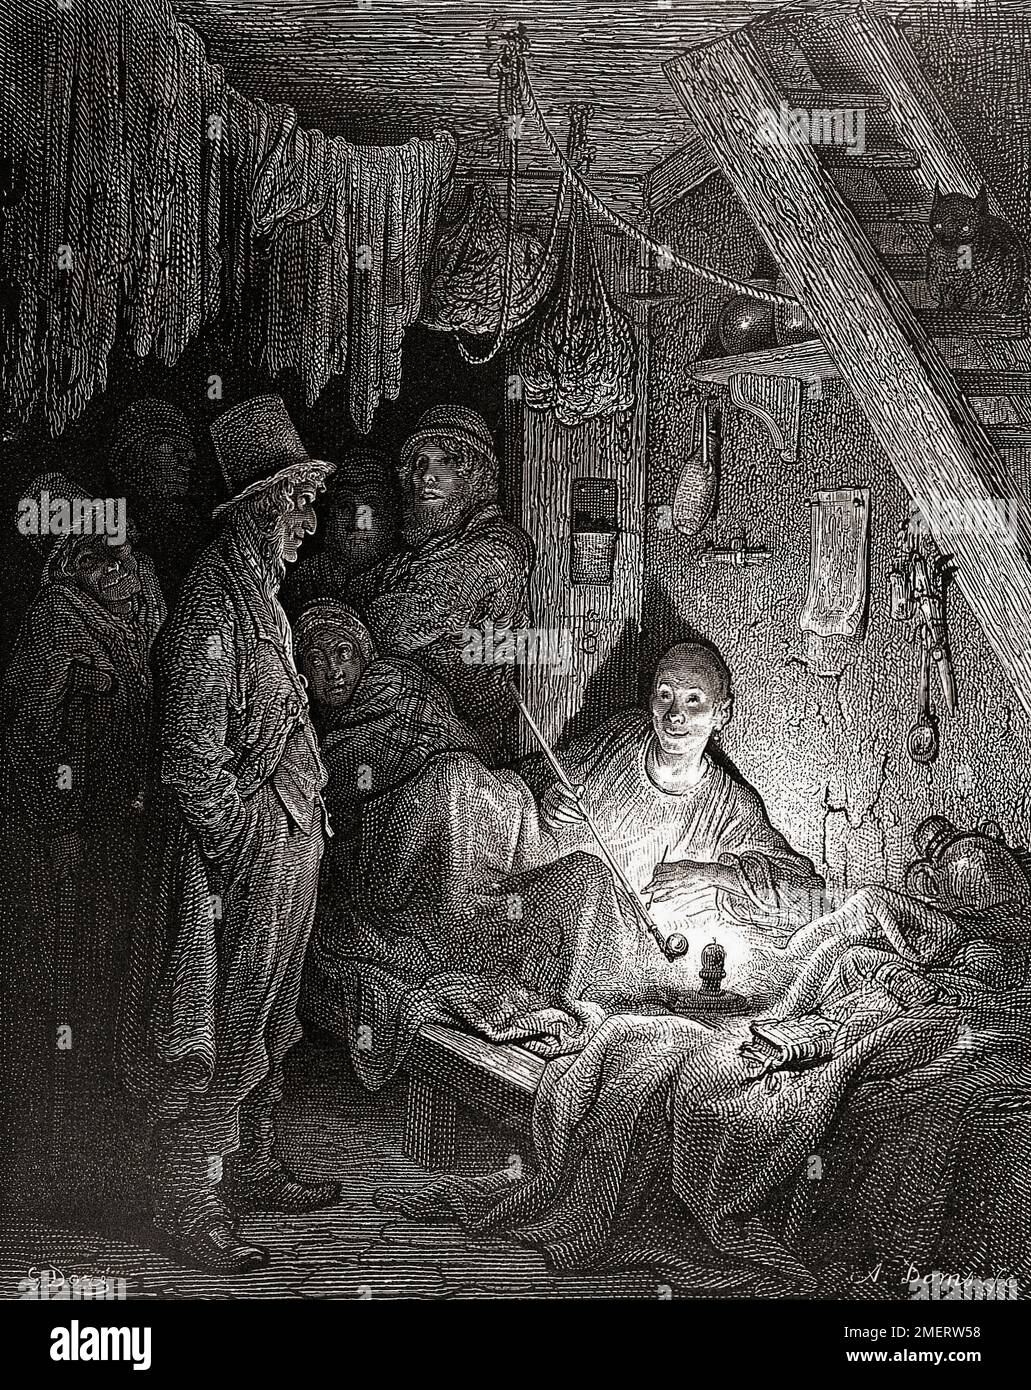 An opium den in the slums of East London, 19th century.  After an illustration by Gustave Doré in the 1890 American edition of London: A Pilgrimage written by Blanchard Jerrold and illustrated by Gustave Doré. Stock Photo